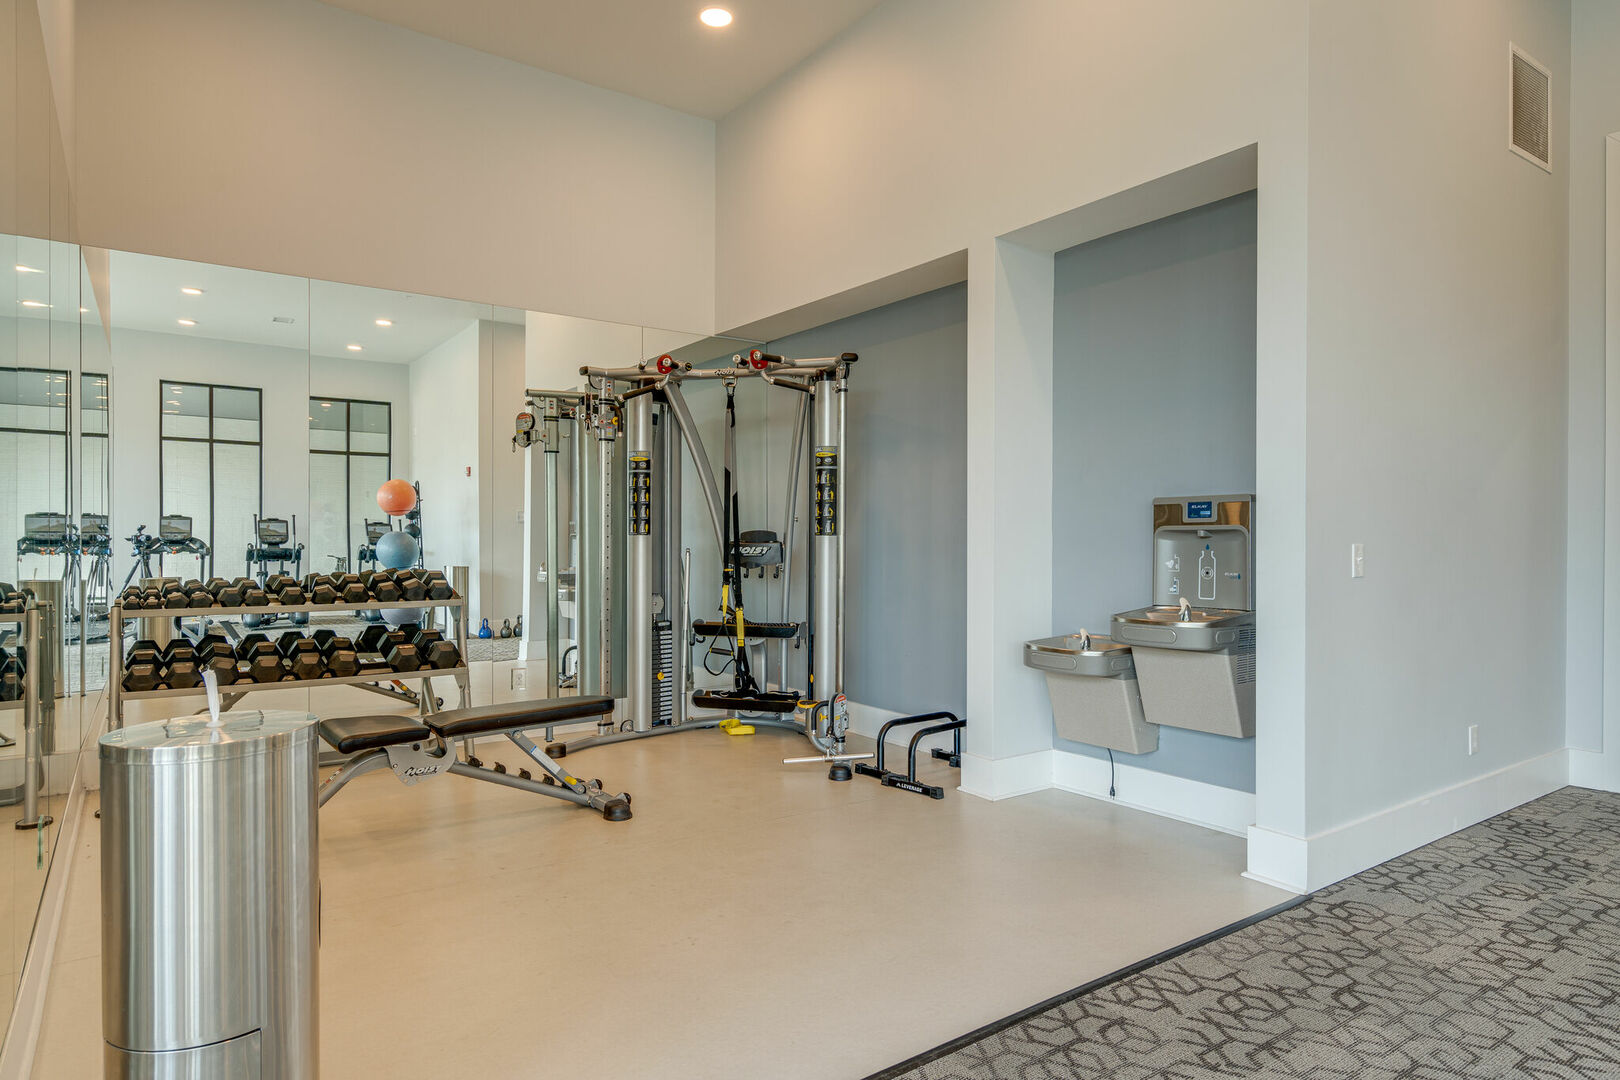 Fitness center in building